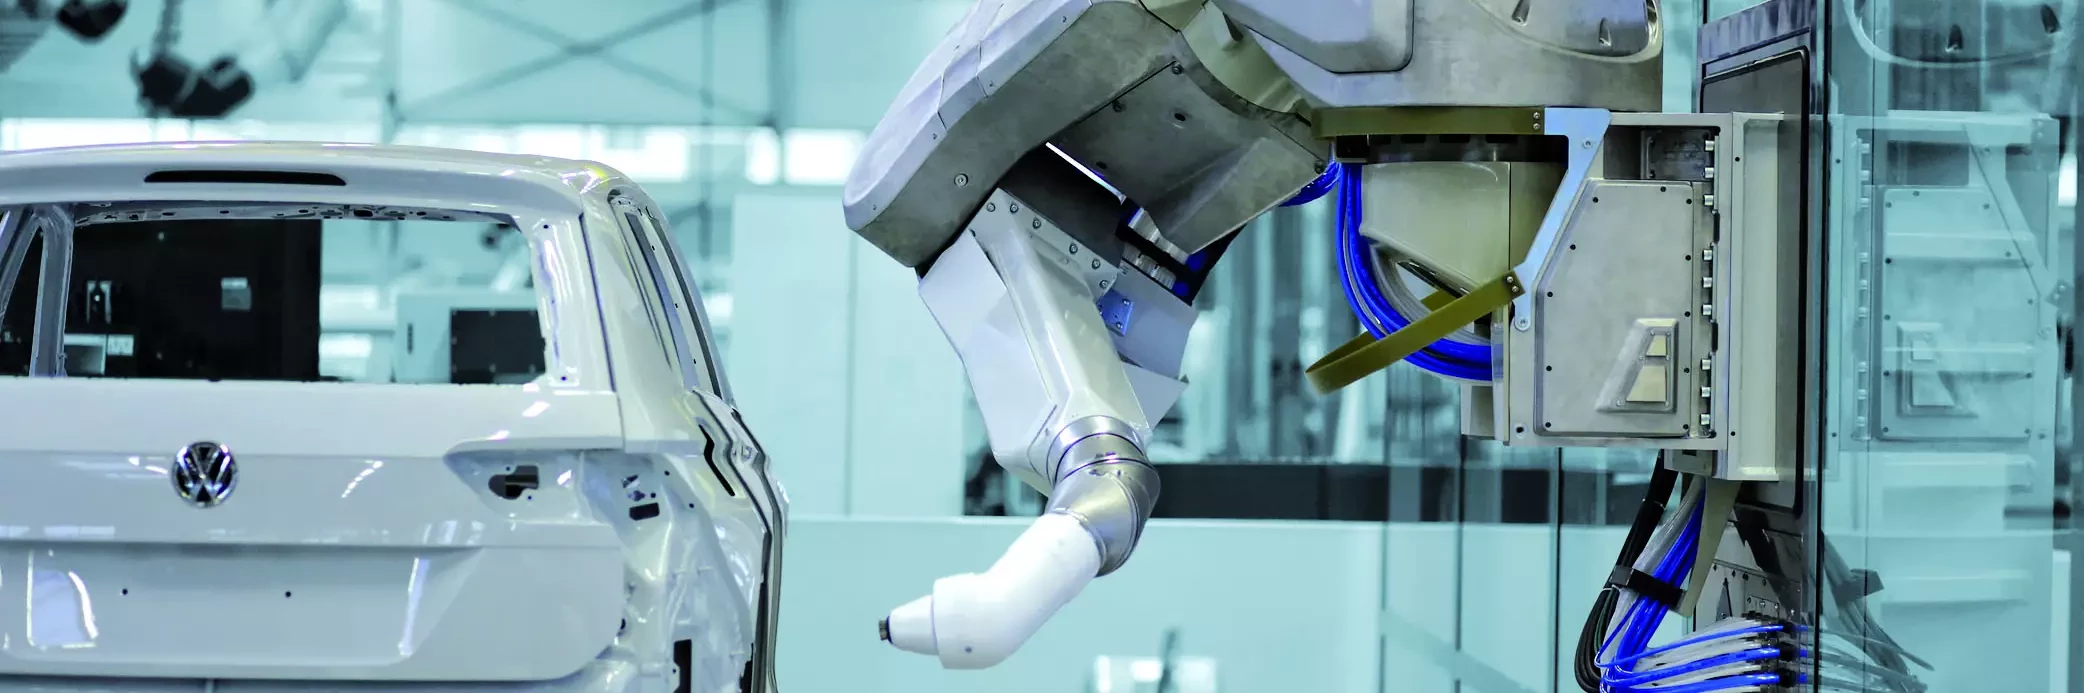 Dürr's Paint Robots offer modular design and capacity to spare